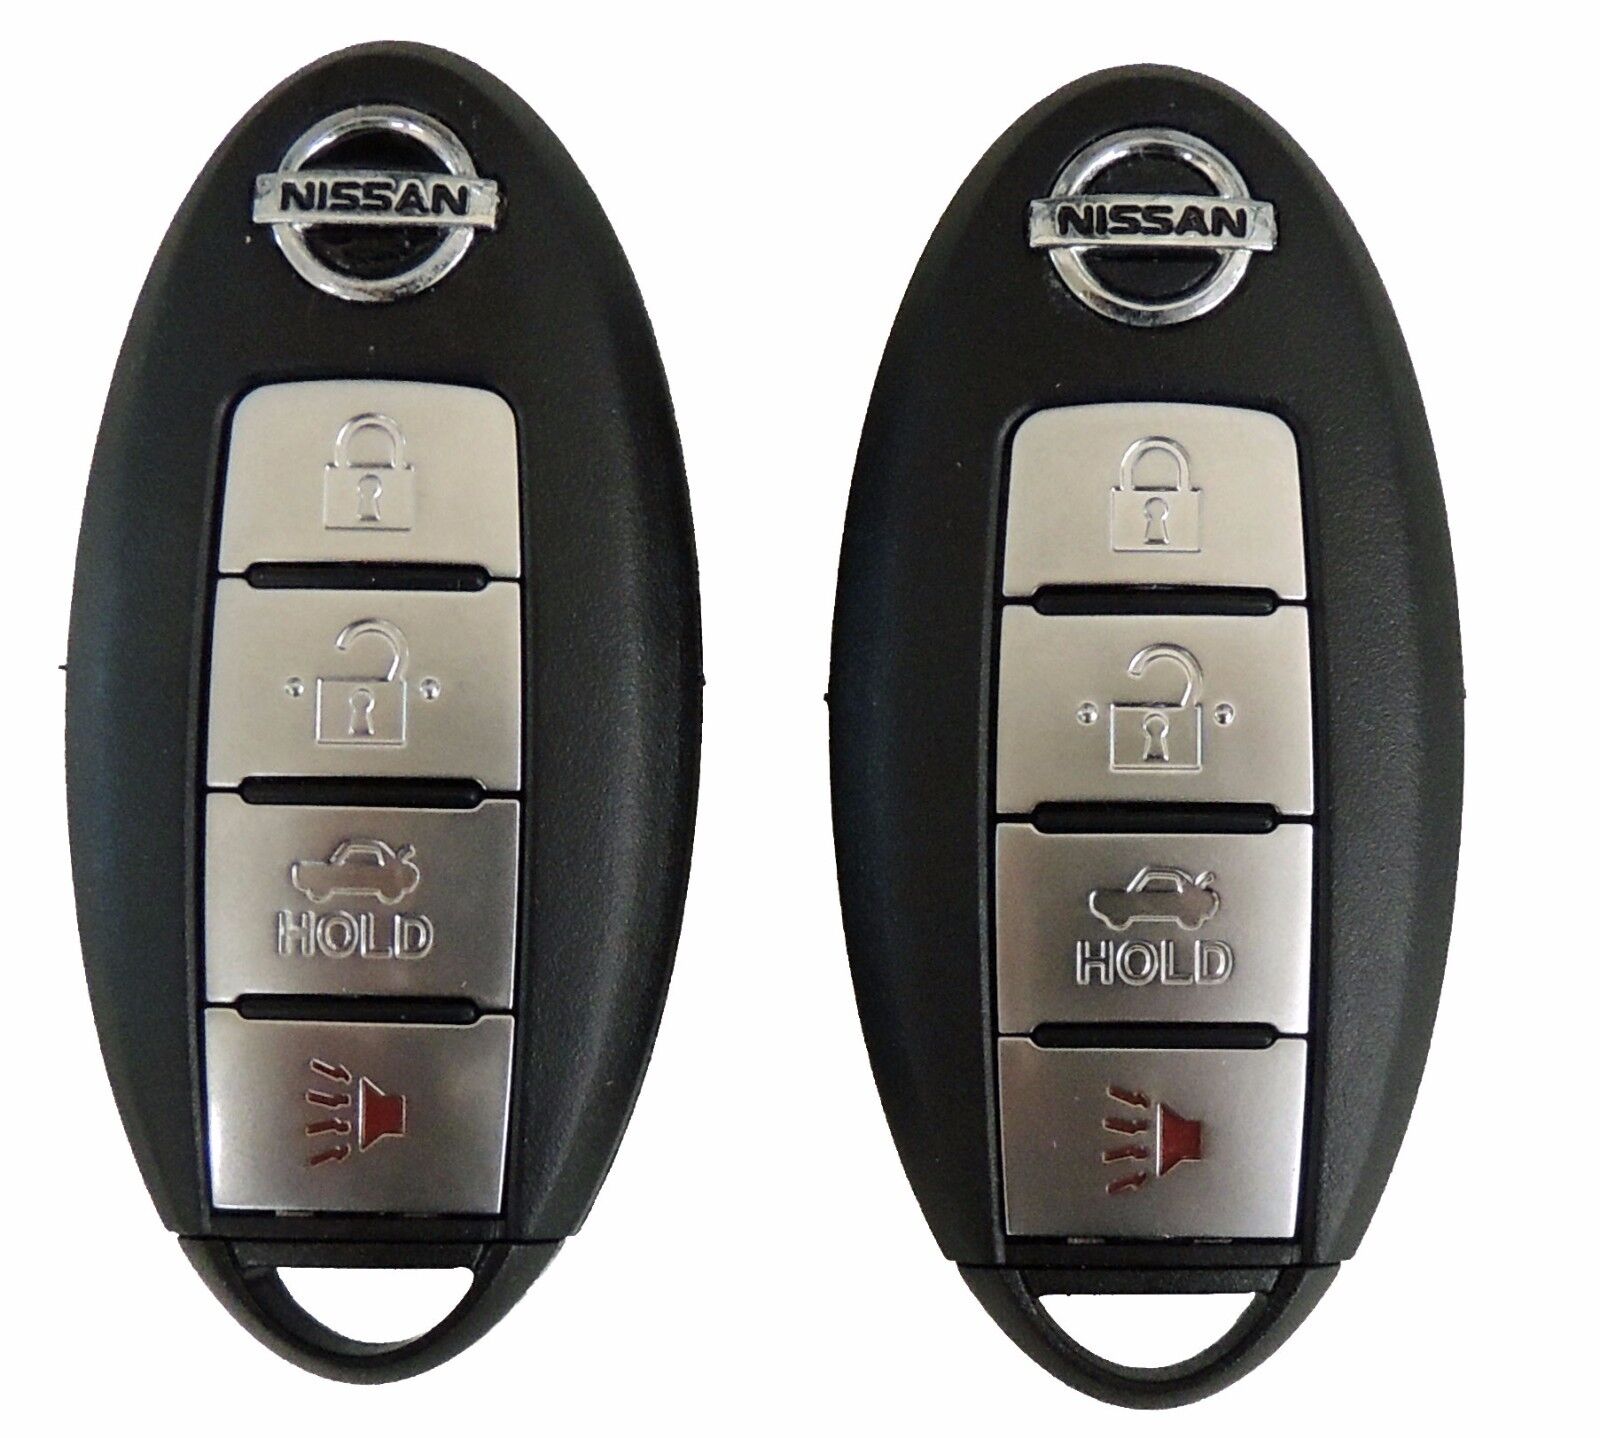 2 Keyless Entry Remote Key Fobs for Nissan Maxima and Altima KR55WK48903